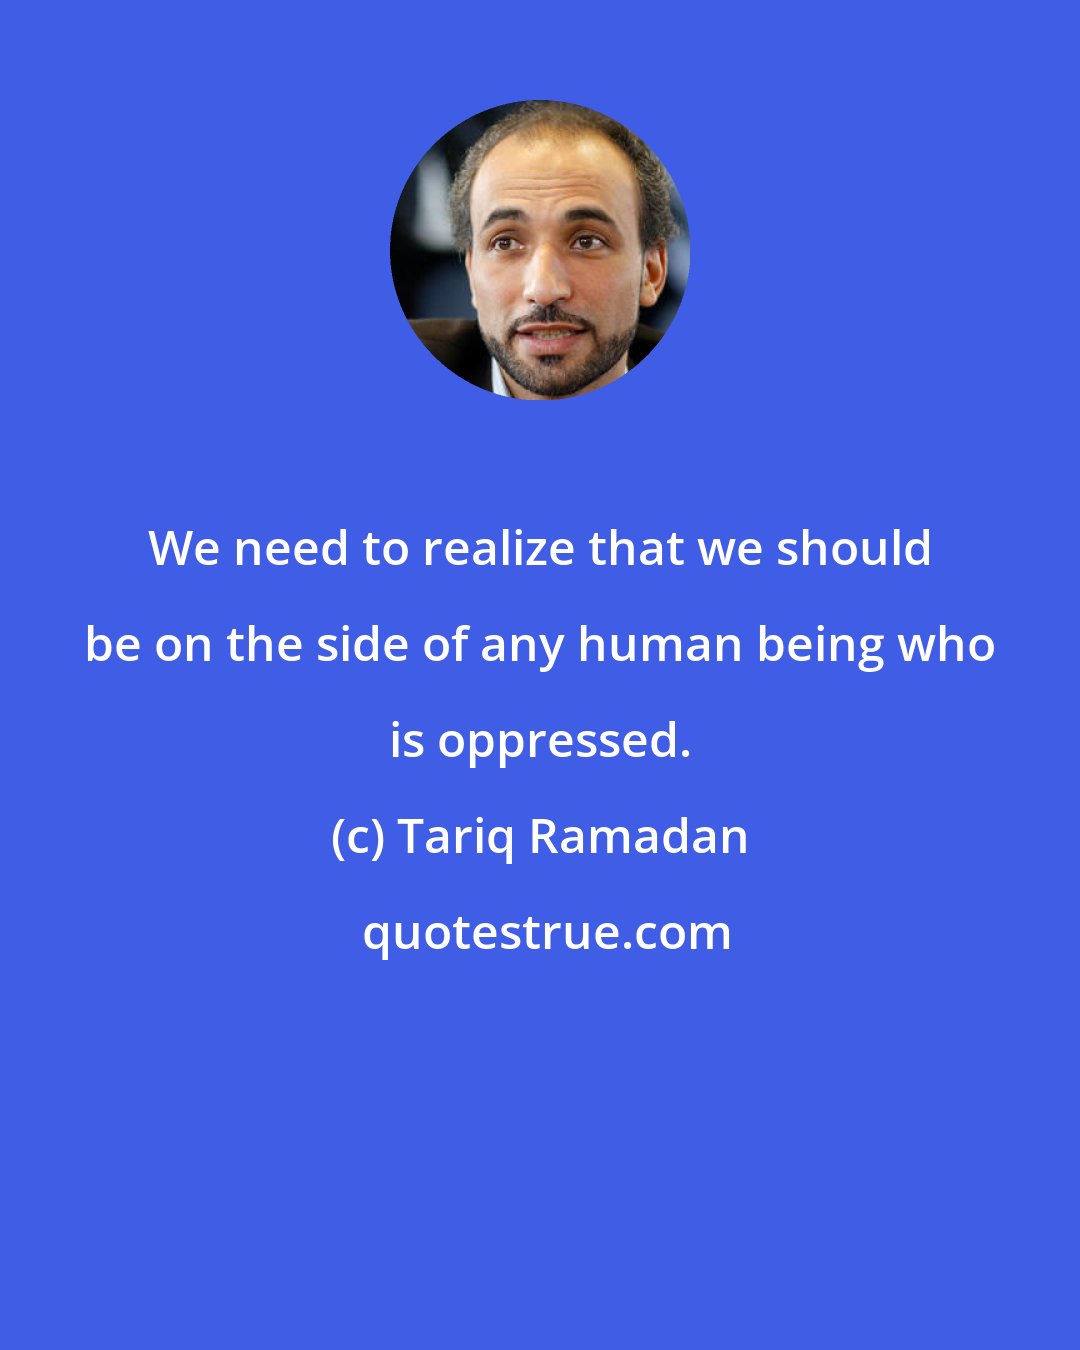 Tariq Ramadan: We need to realize that we should be on the side of any human being who is oppressed.